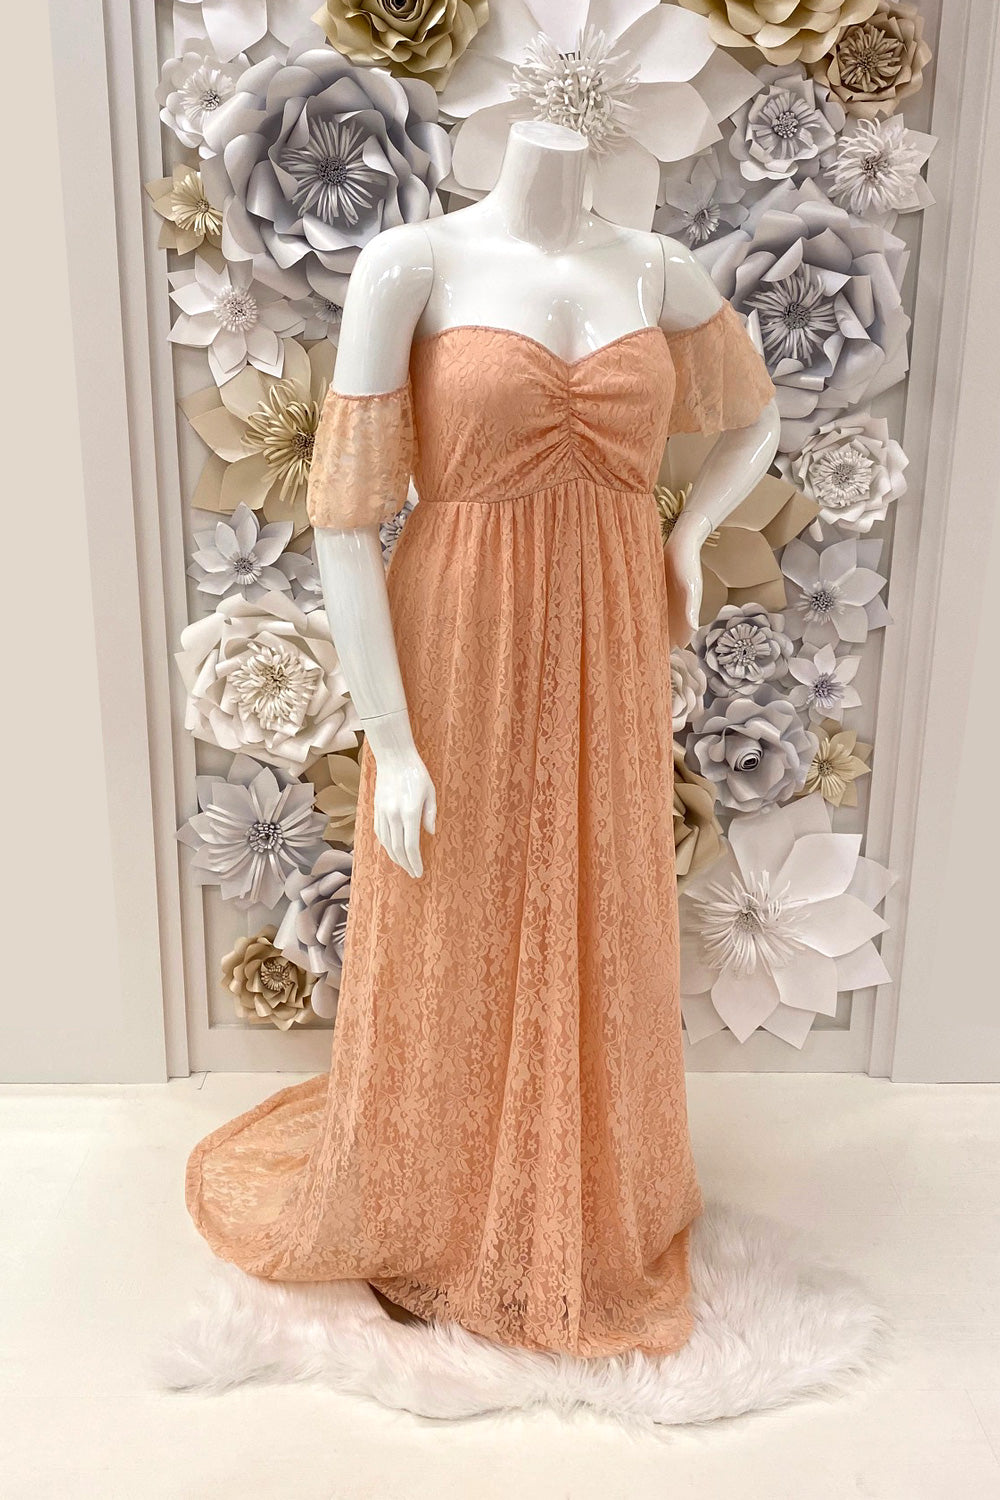 Maternity-Photo-Shoot-Stretchy-Off-Shoulder-Lace-Dress-in-Peach